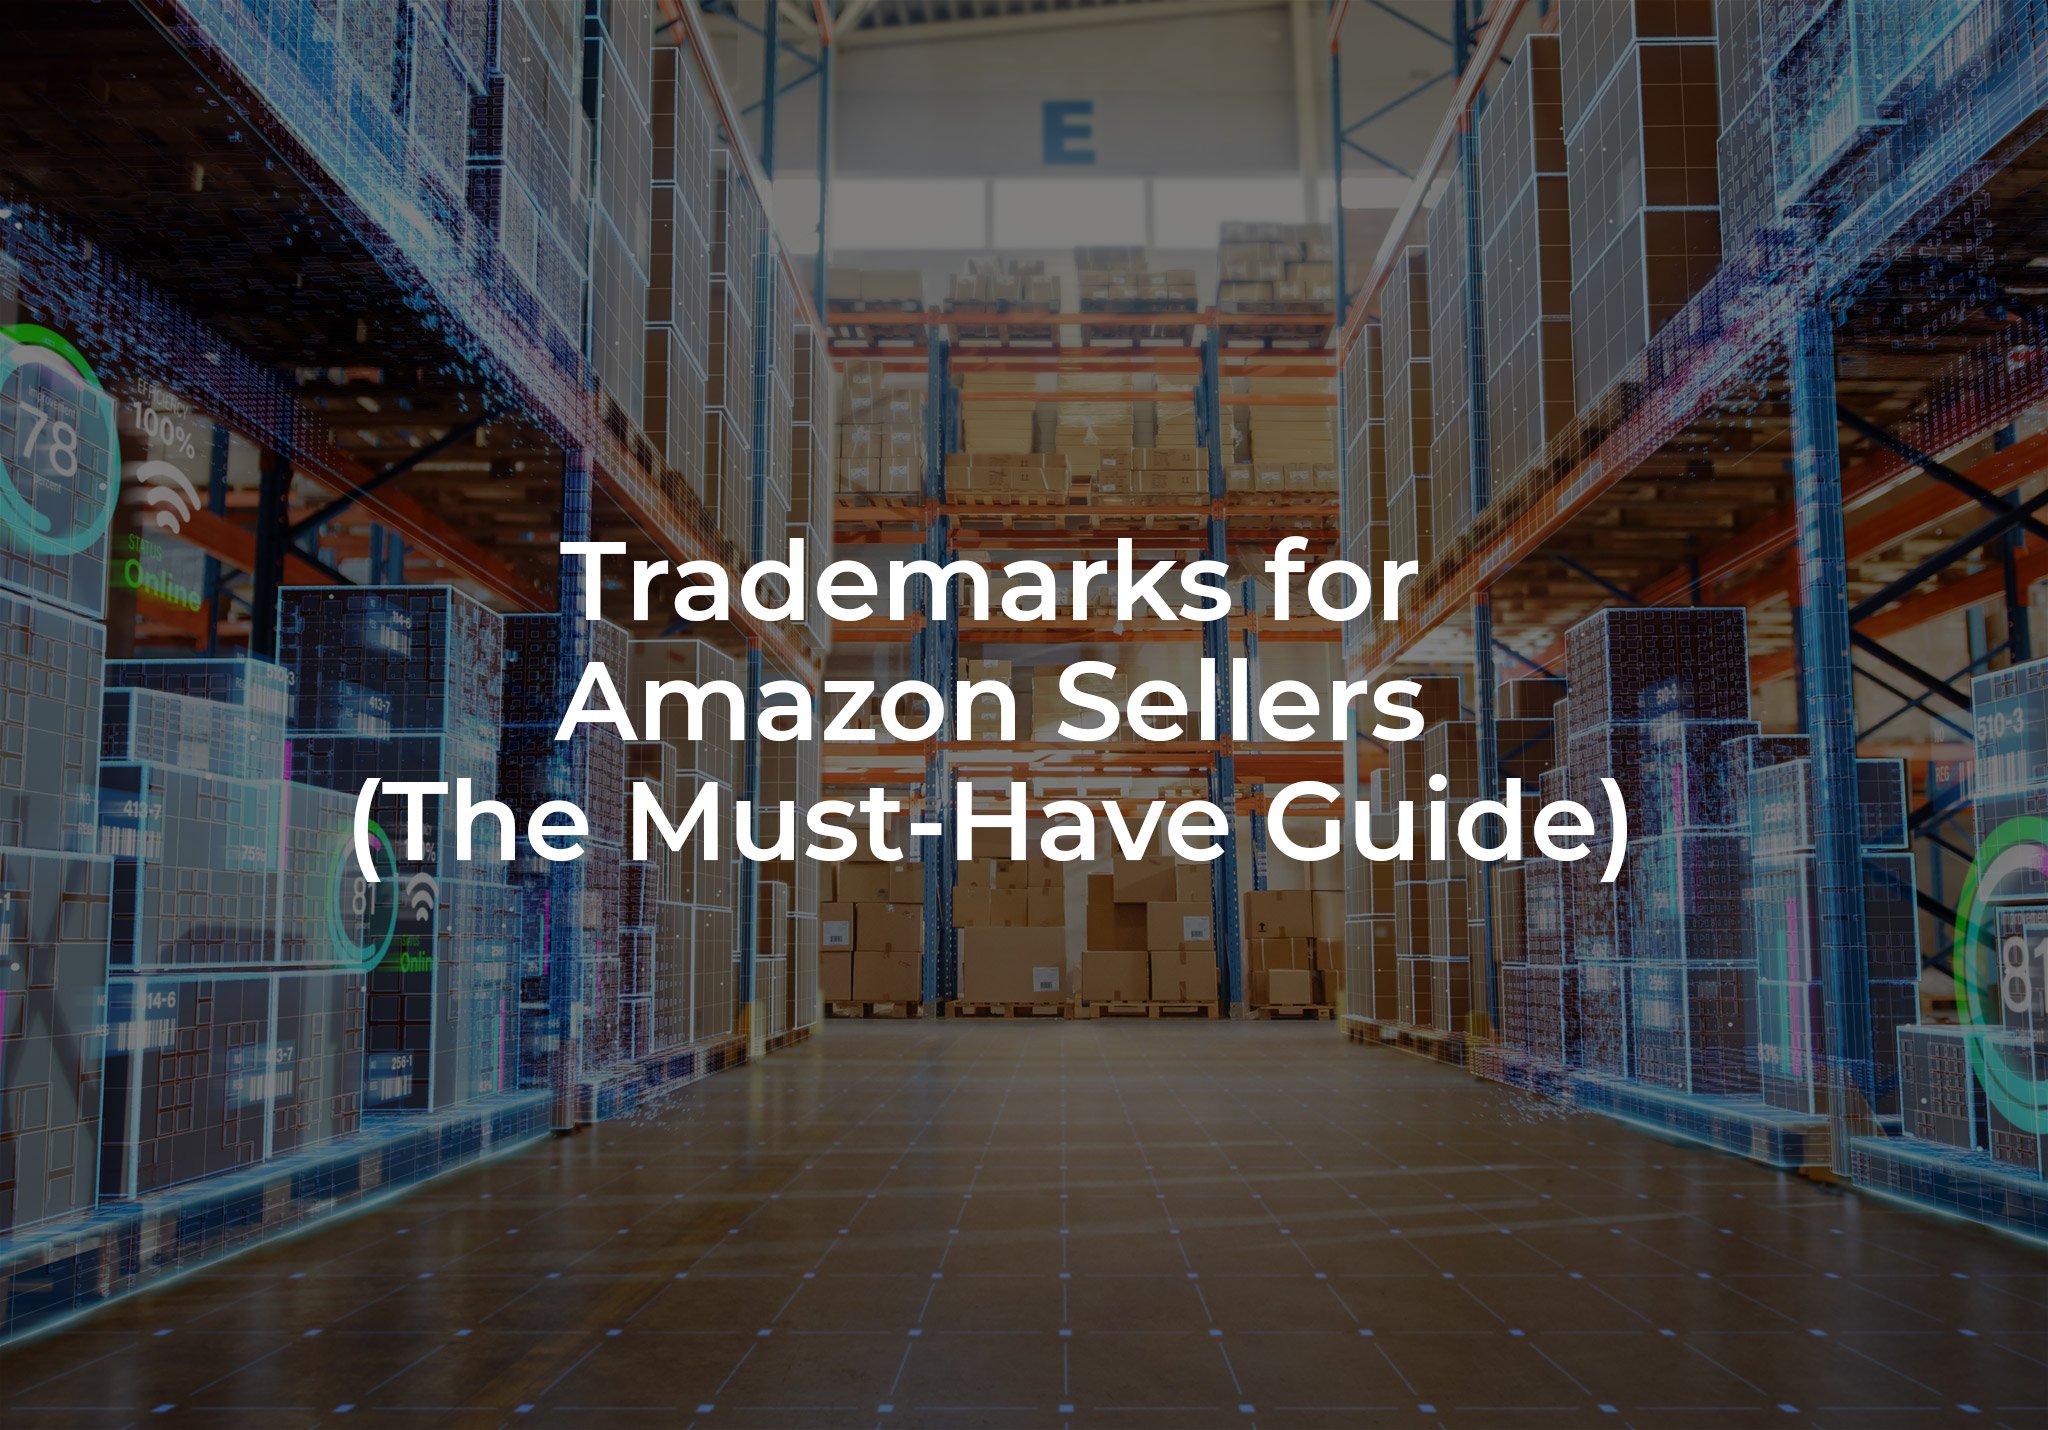 Trademarks for Amazon Sellers